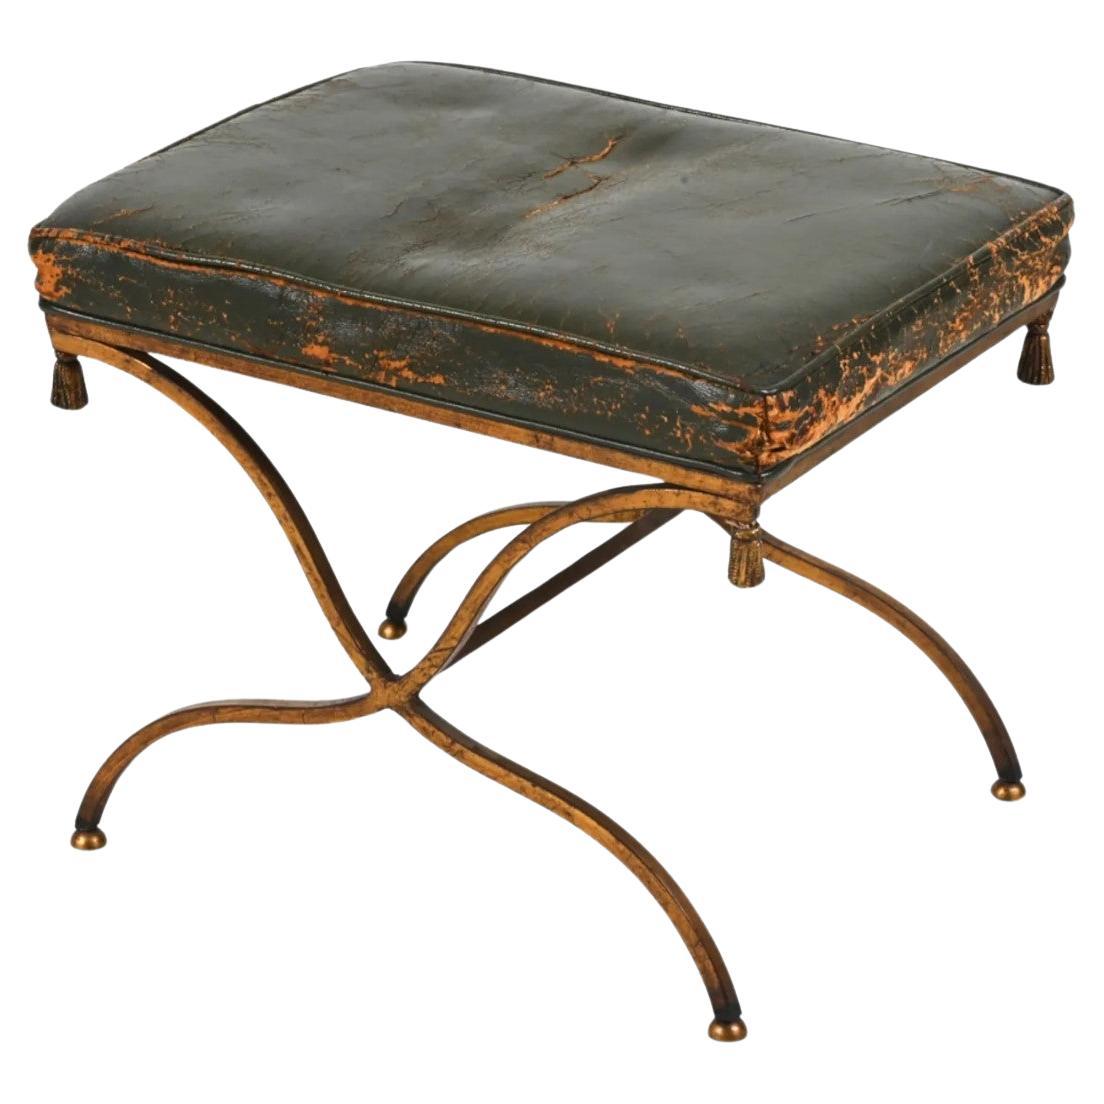 Distressed Leather and Gilt Metal Stool